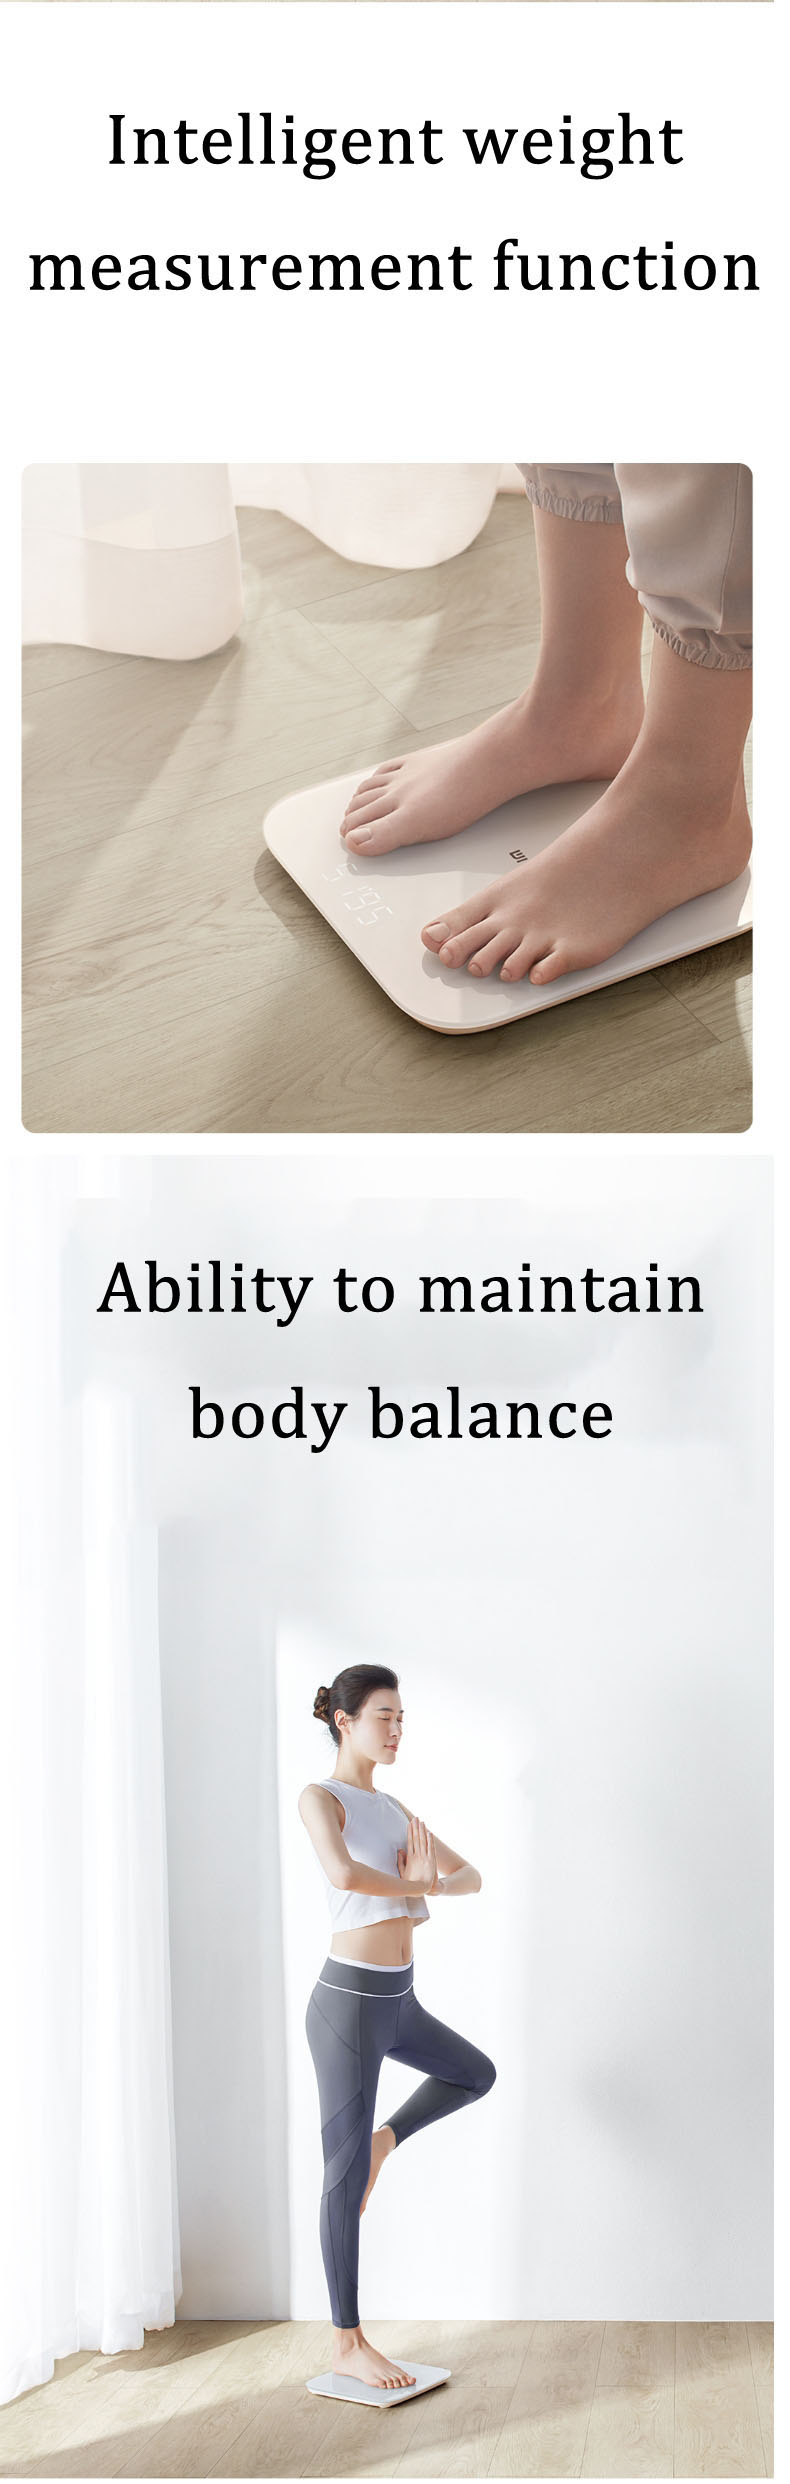 XIAOMI 2.0 Intelligent bluetooth Weight Scale Smart APP Control Precision Weight Scale LED Display Fitness Yoga Tools Scale Support Android IOS 3